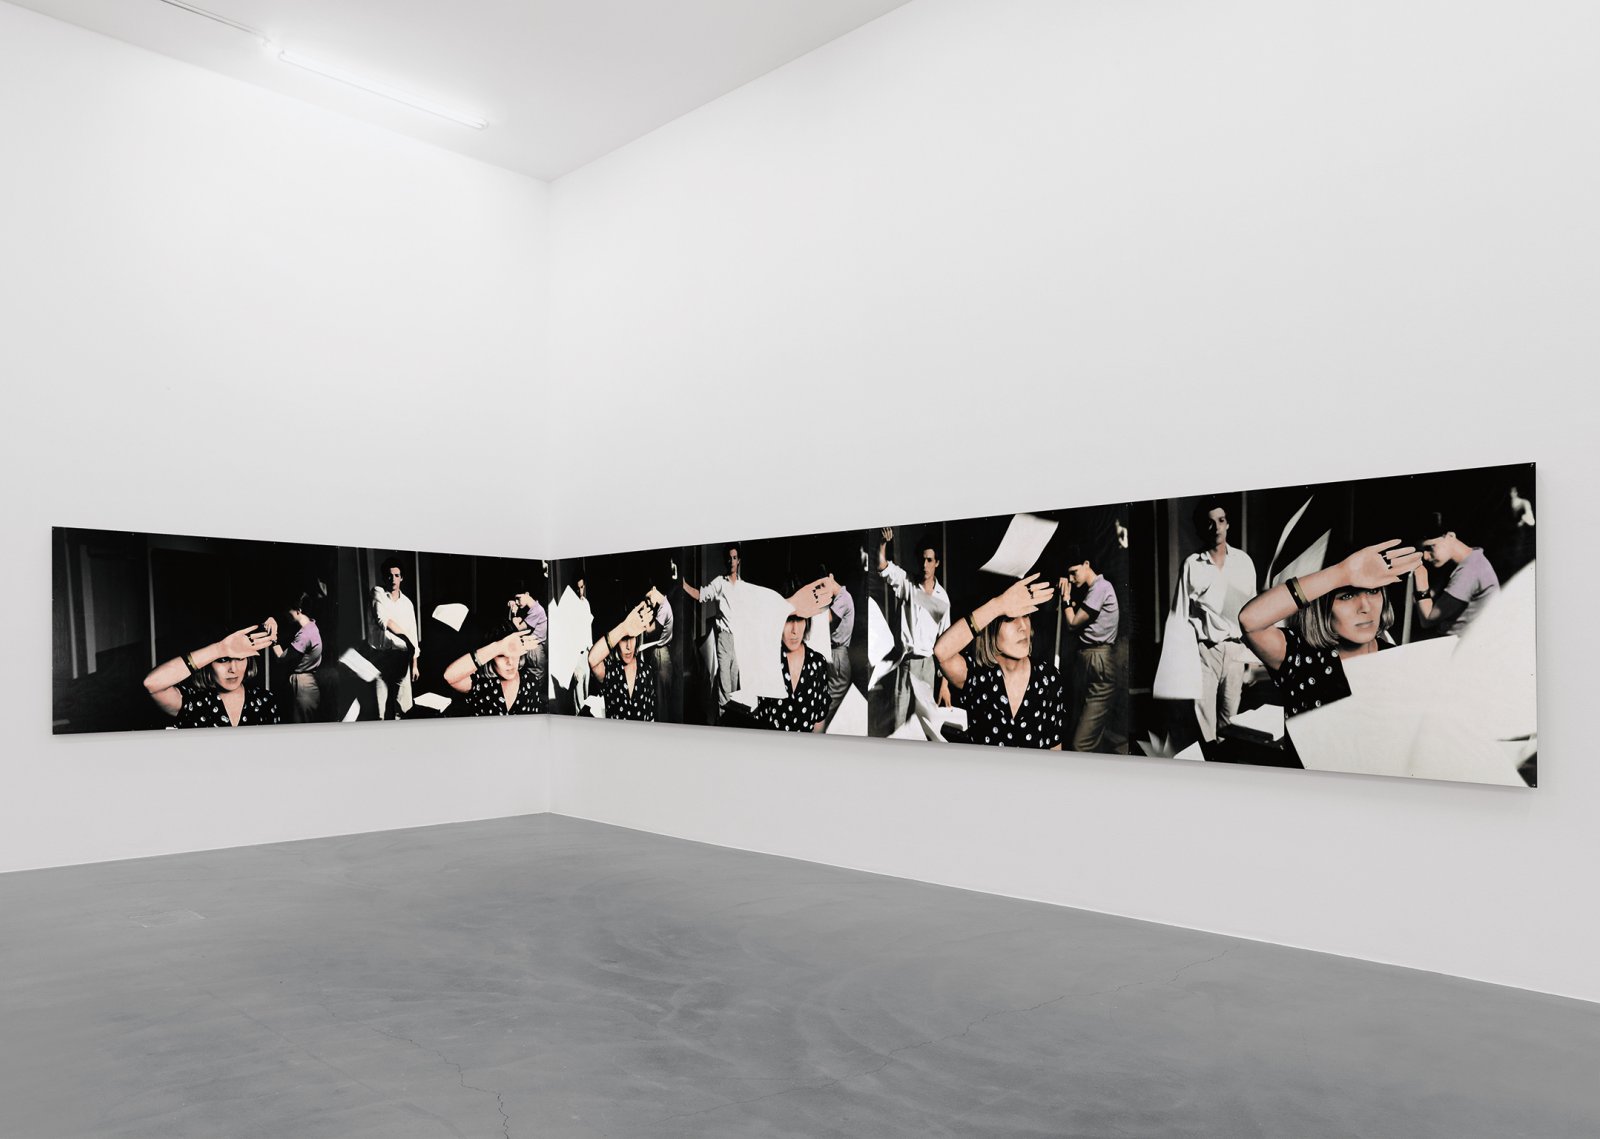 Ian Wallace, An Attack on Literature I &amp; II, 1975, 12 hand-coloured black and white photographs, each 48 x 69 in. (123 x 174 cm). Installation view, A Literature of Images, Kunsthalle Zürich, 2008